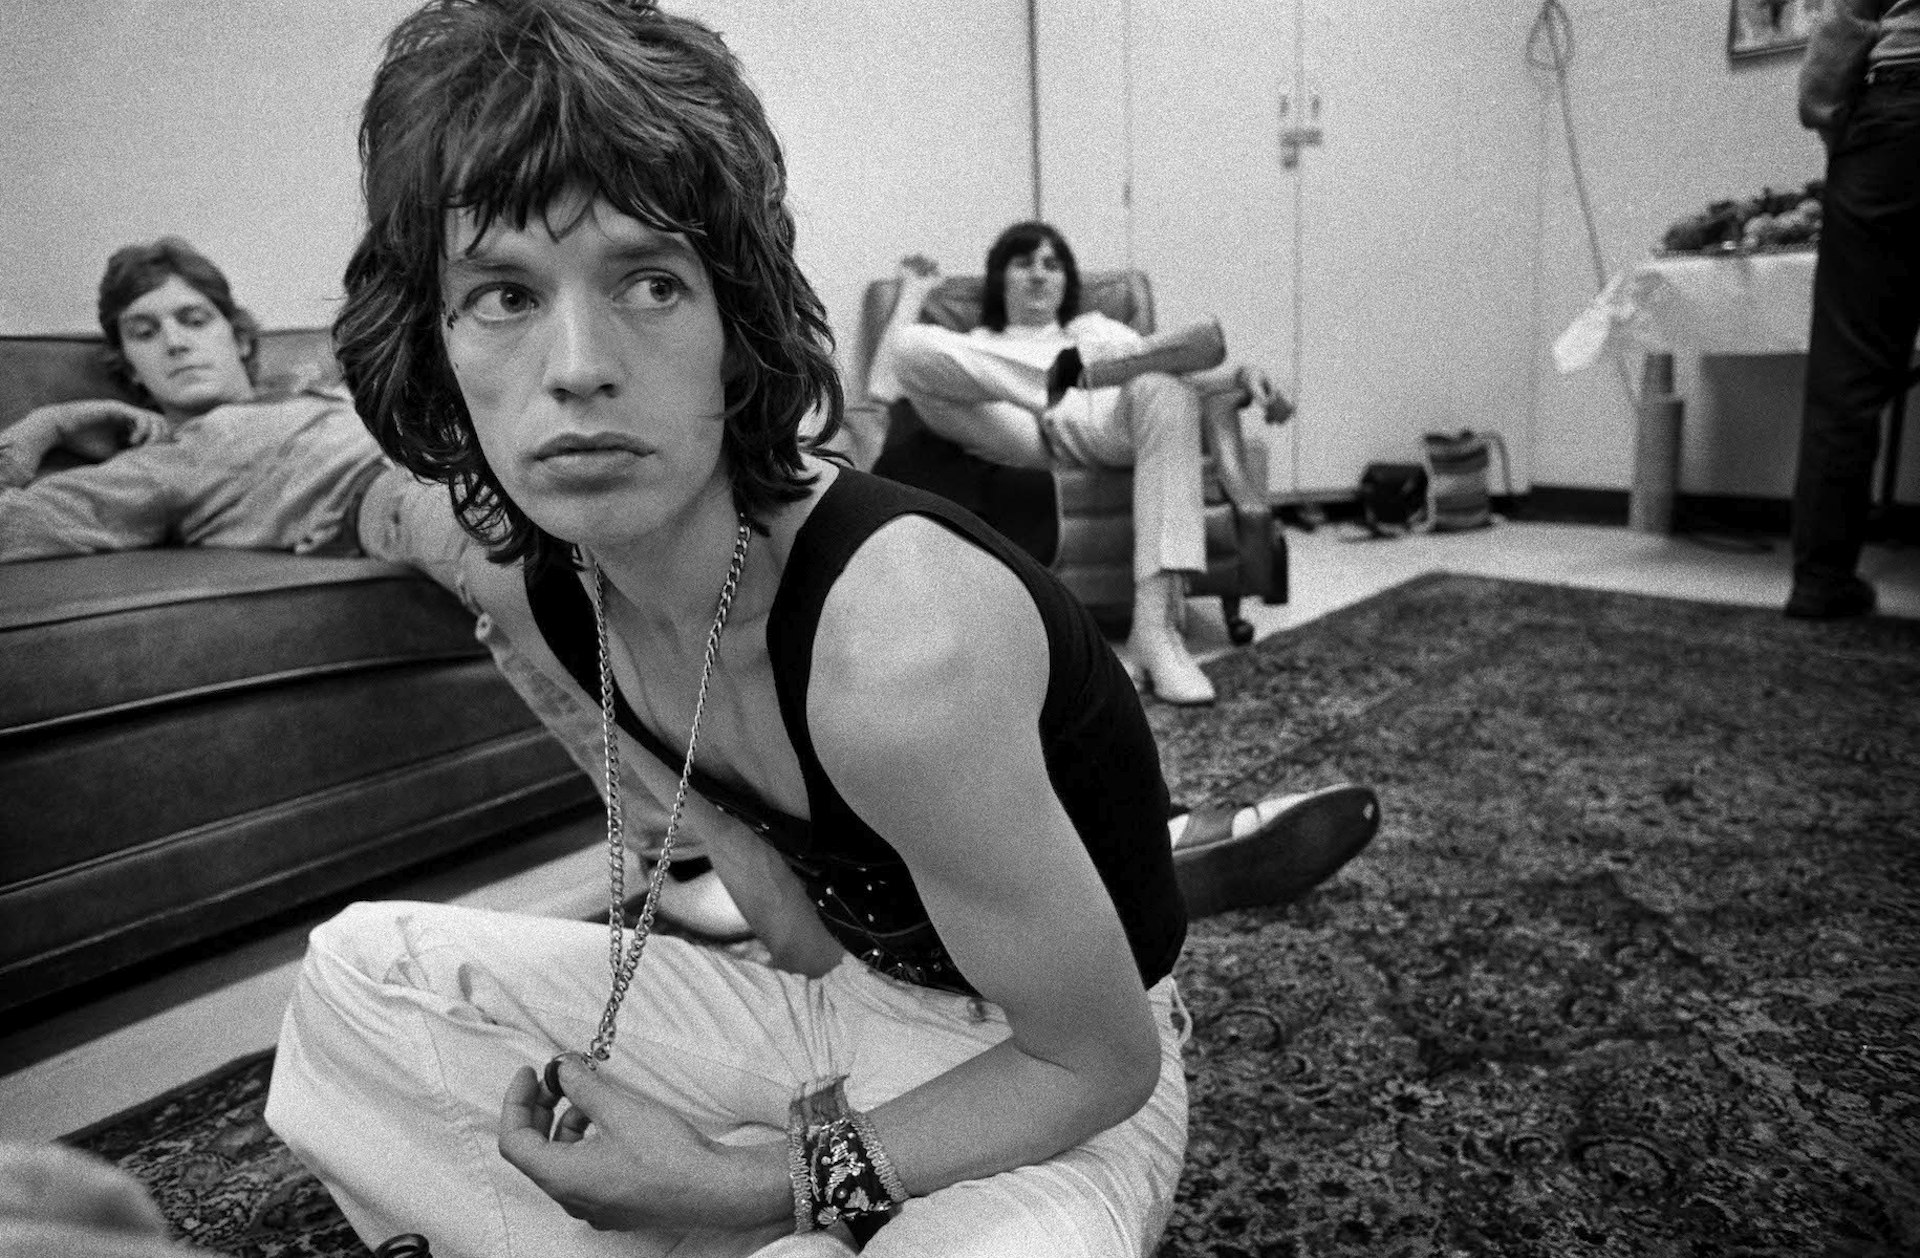 Candid photos of the Rolling Stones on tour in 1972